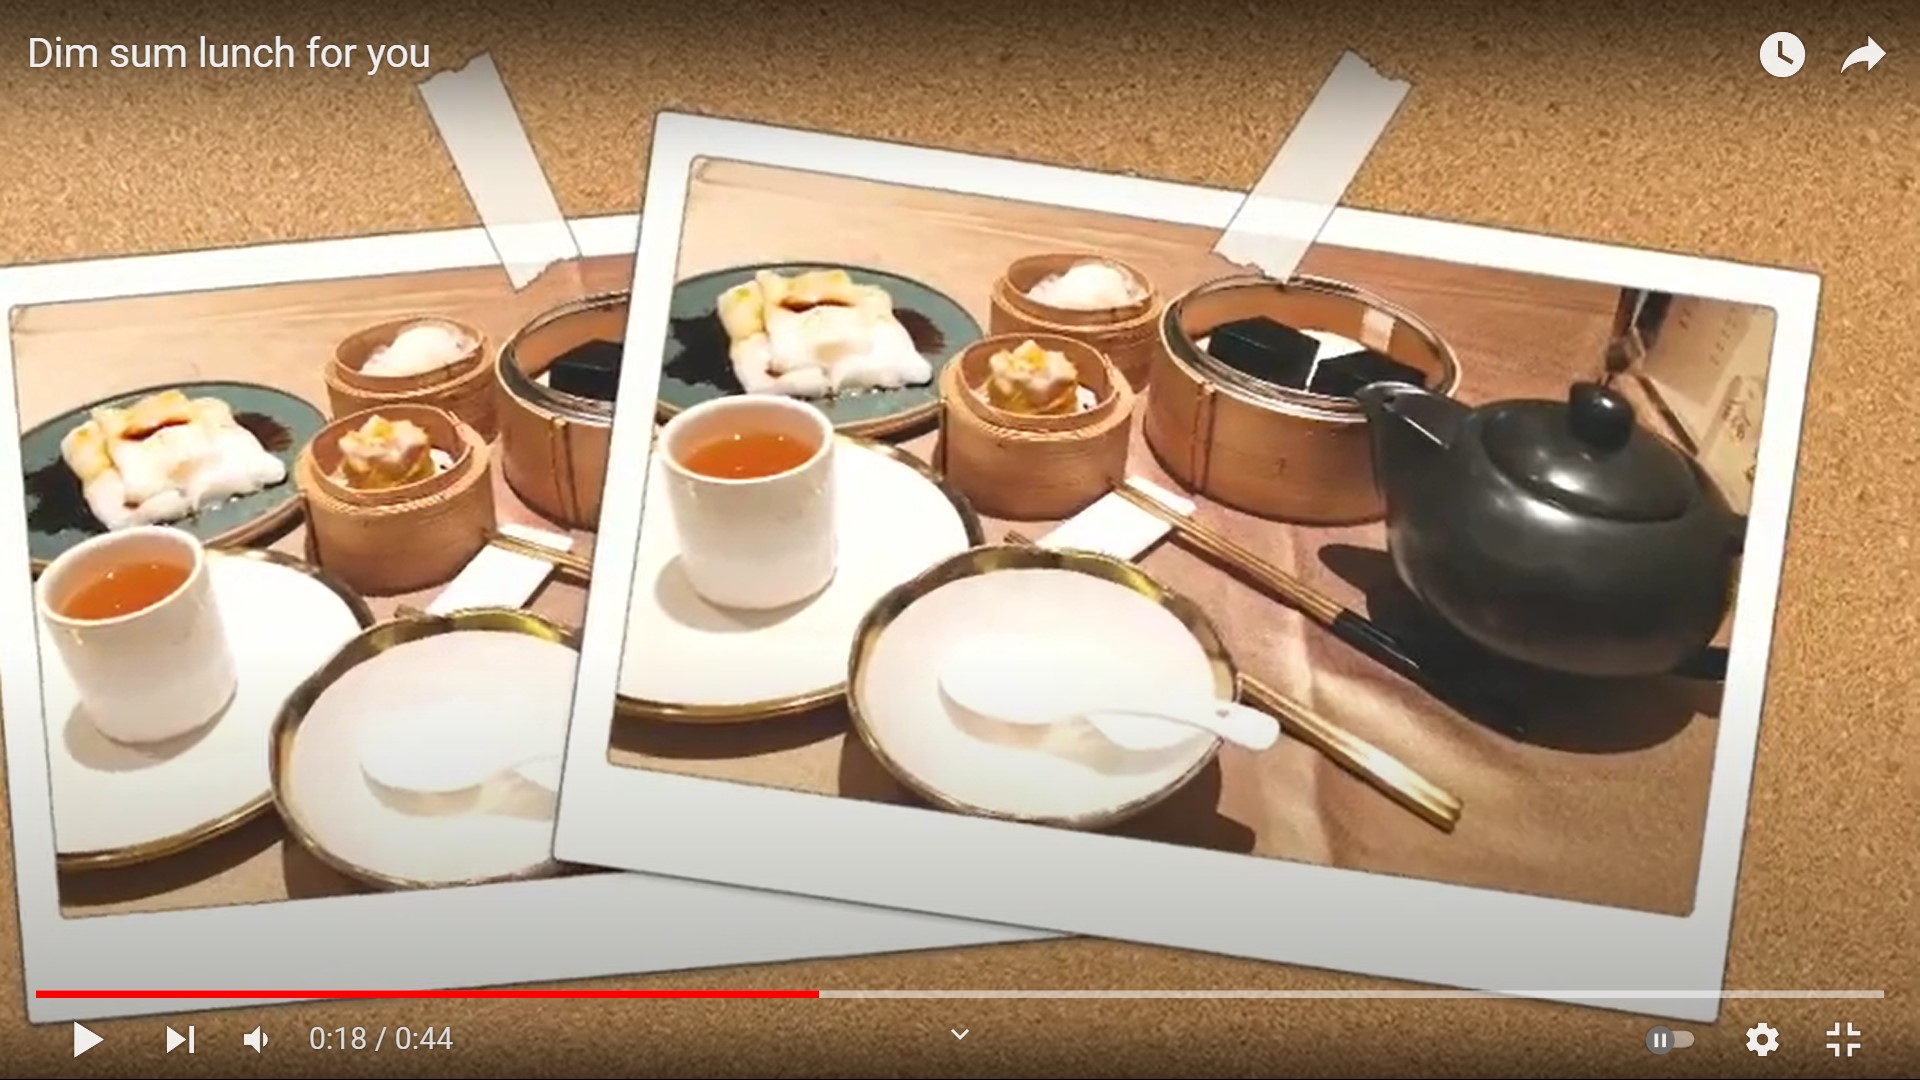 Frank’s “Dim sum lunch for you” snapshots video